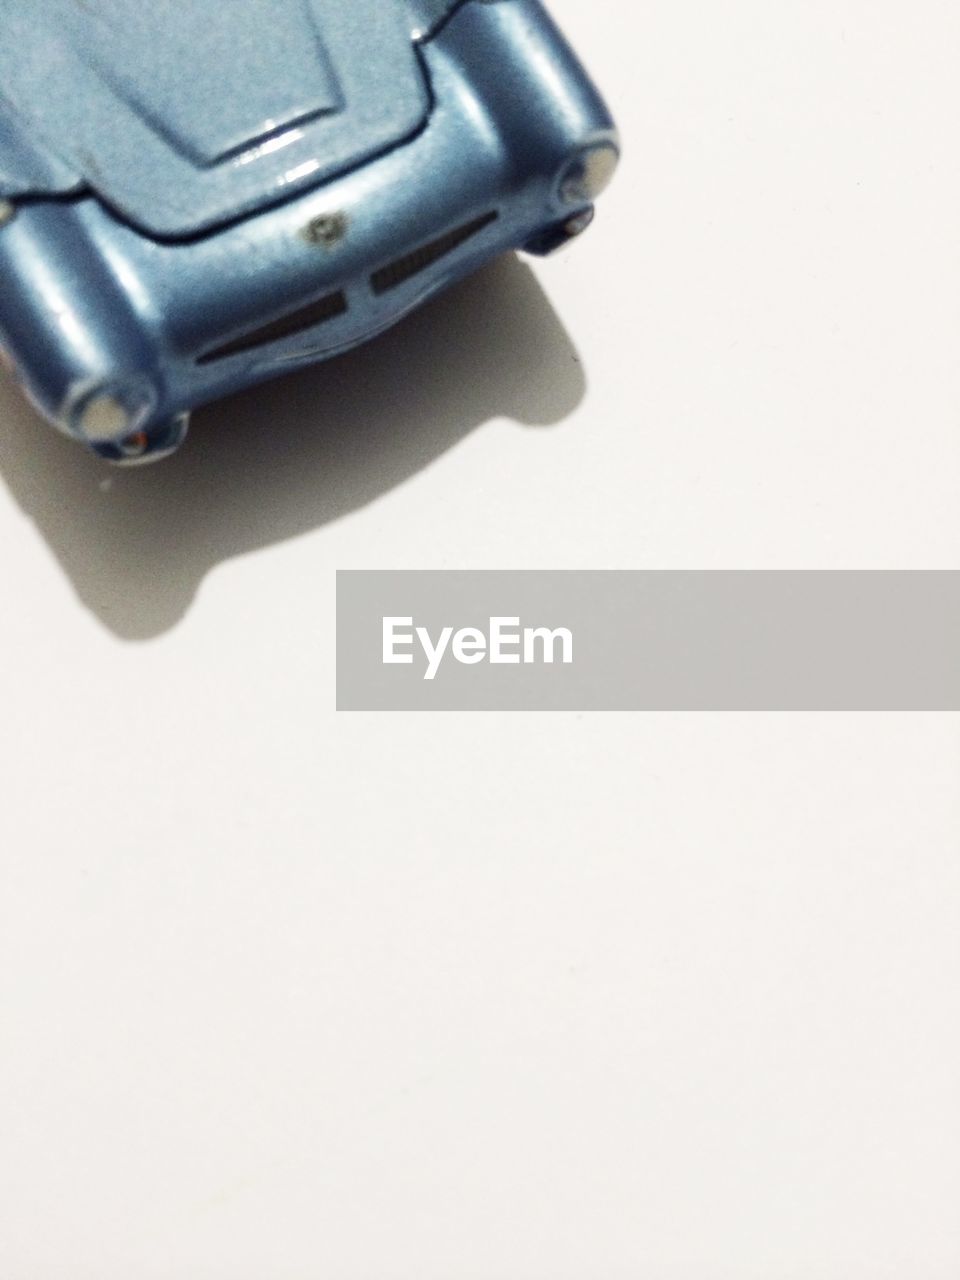 Cropped image of miniature car against white background